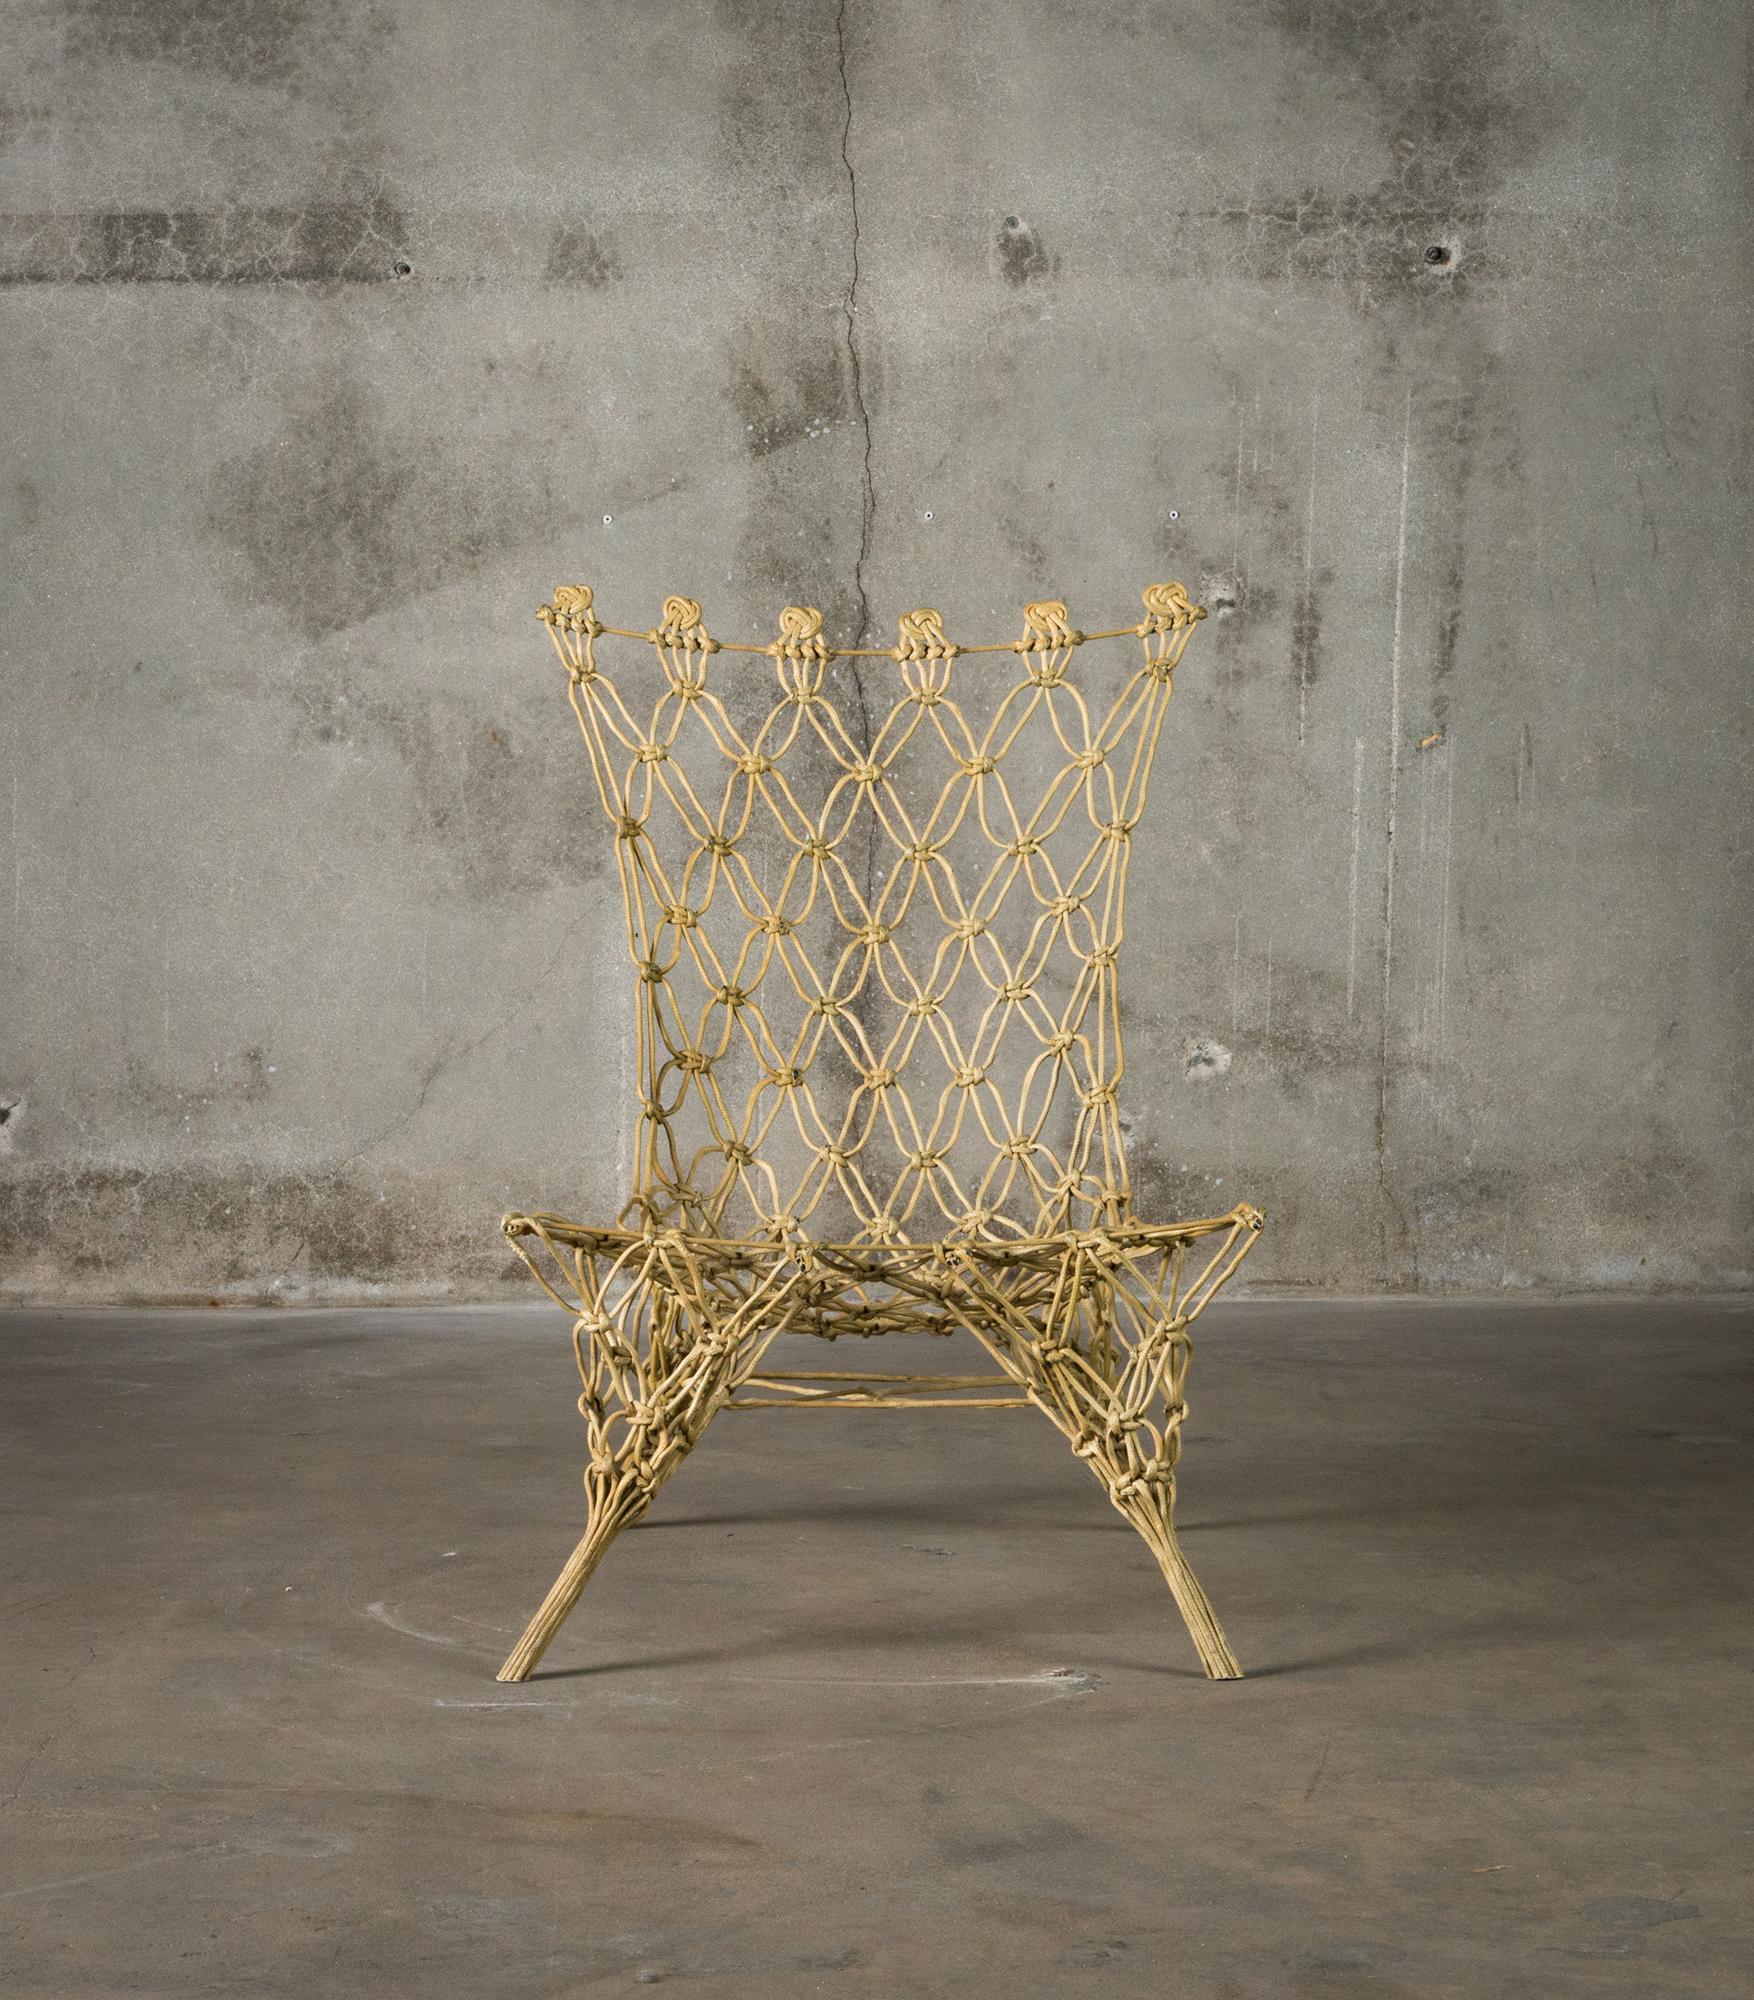 Marcel Wanders, Droog Design, Cappellini Knotted Chair, 1996, Netherlands,  Italy